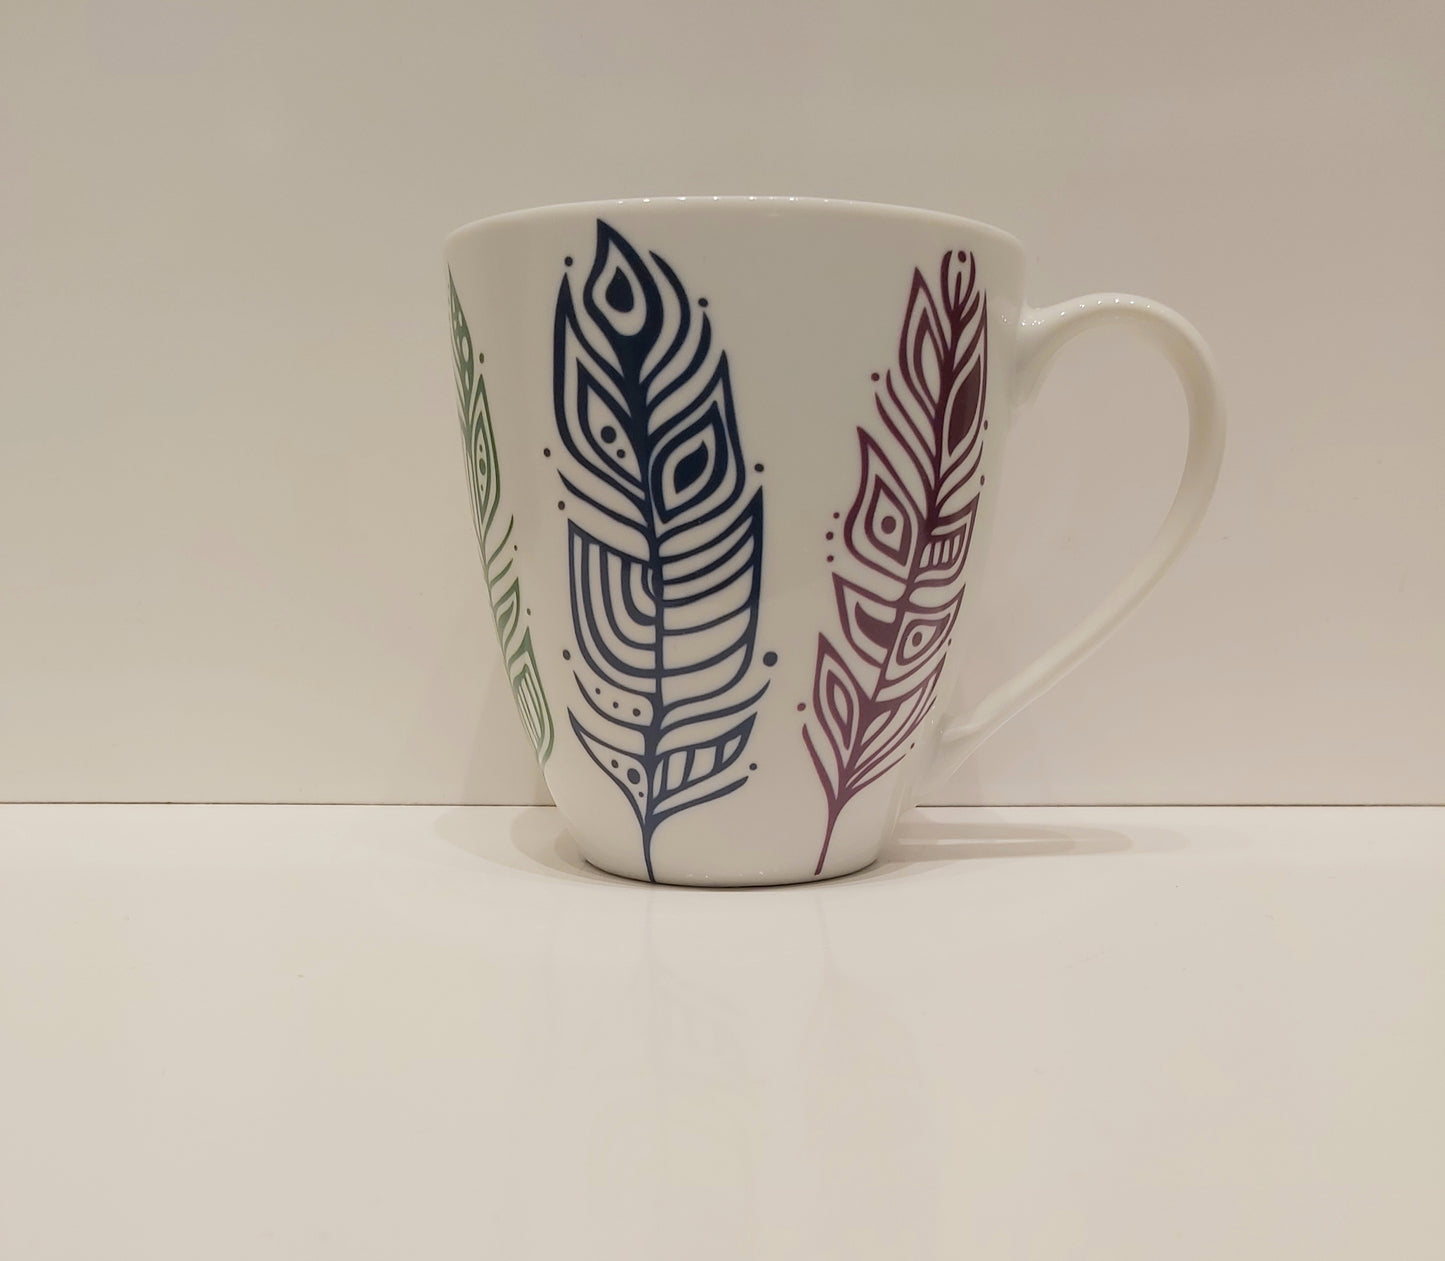 Patrick's Pride Feathers on a tall white mug against a neutral background.